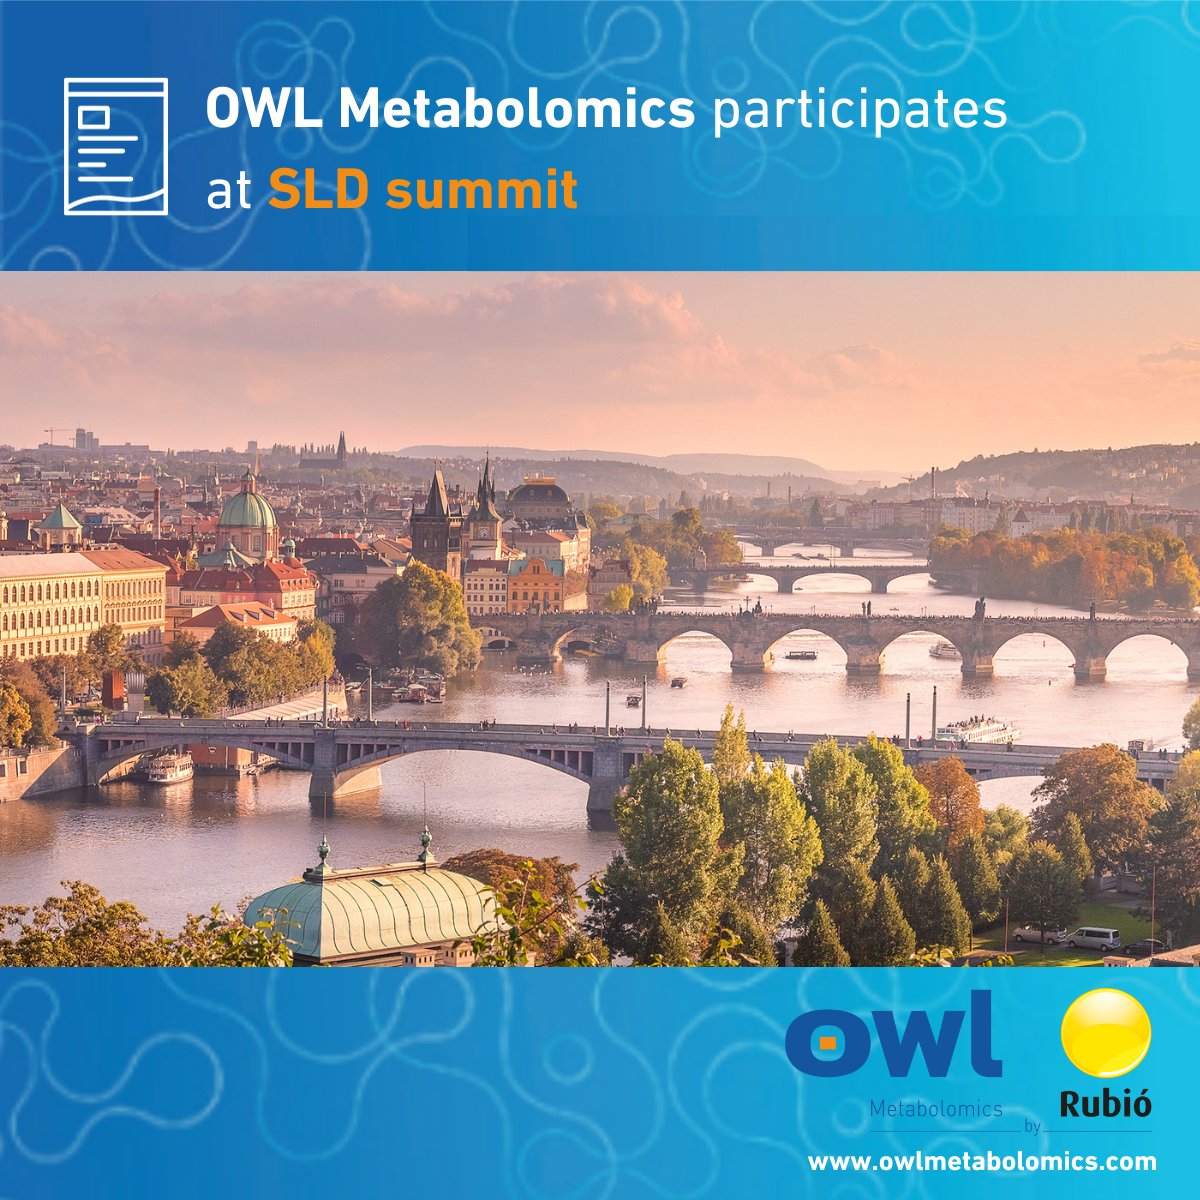 We're proud to share the results of two projects we collaborated on which will be presented as posters at #SLDsummit in Prague. Led by the University of Lisbon, the research delves into metabolic liver disease and hepatocarcinogenesis, offering new insights in the field.